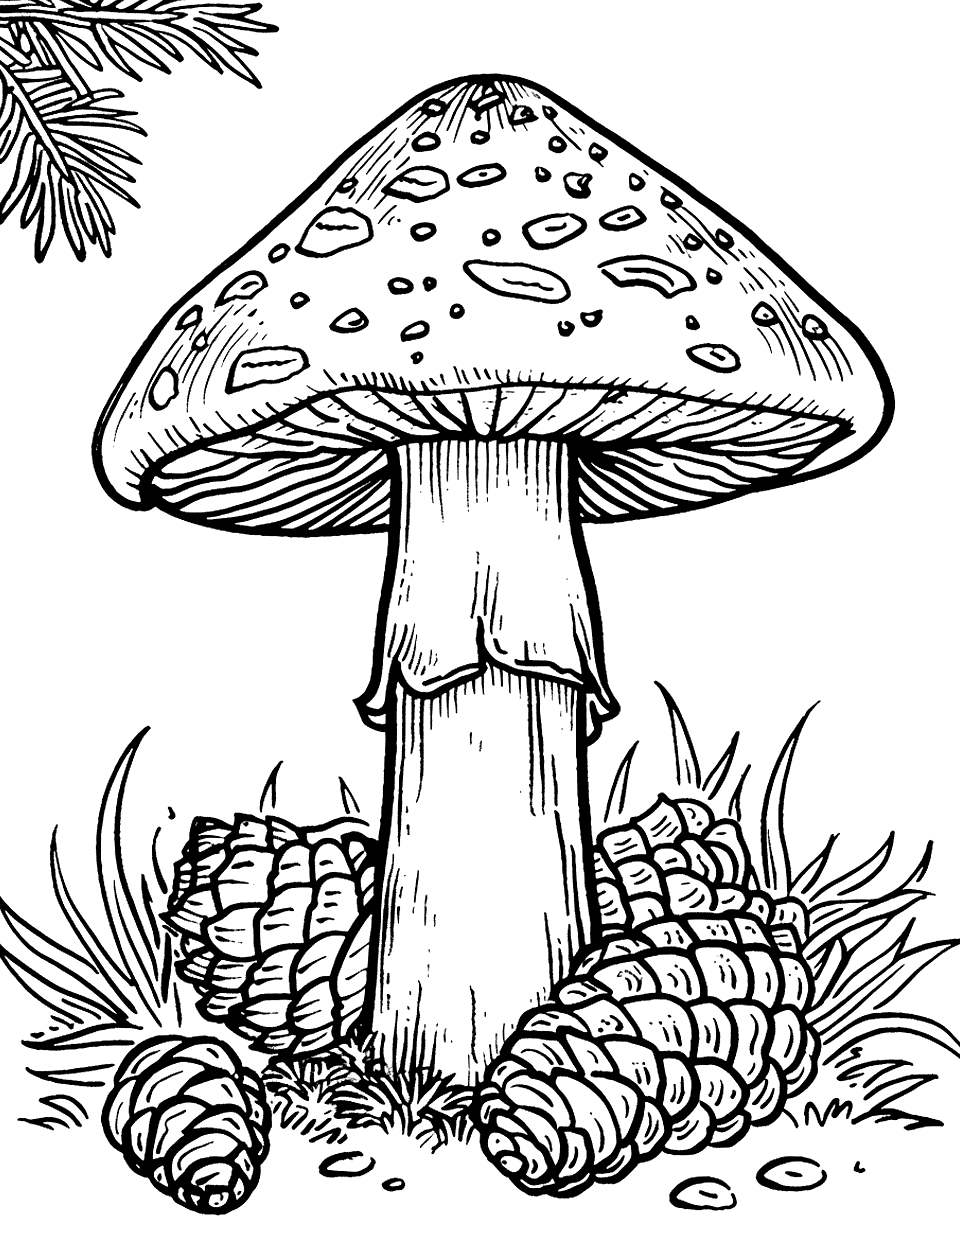 Mushroom and Pine Cones Coloring Page - A mushroom grows near scattered pine cones.